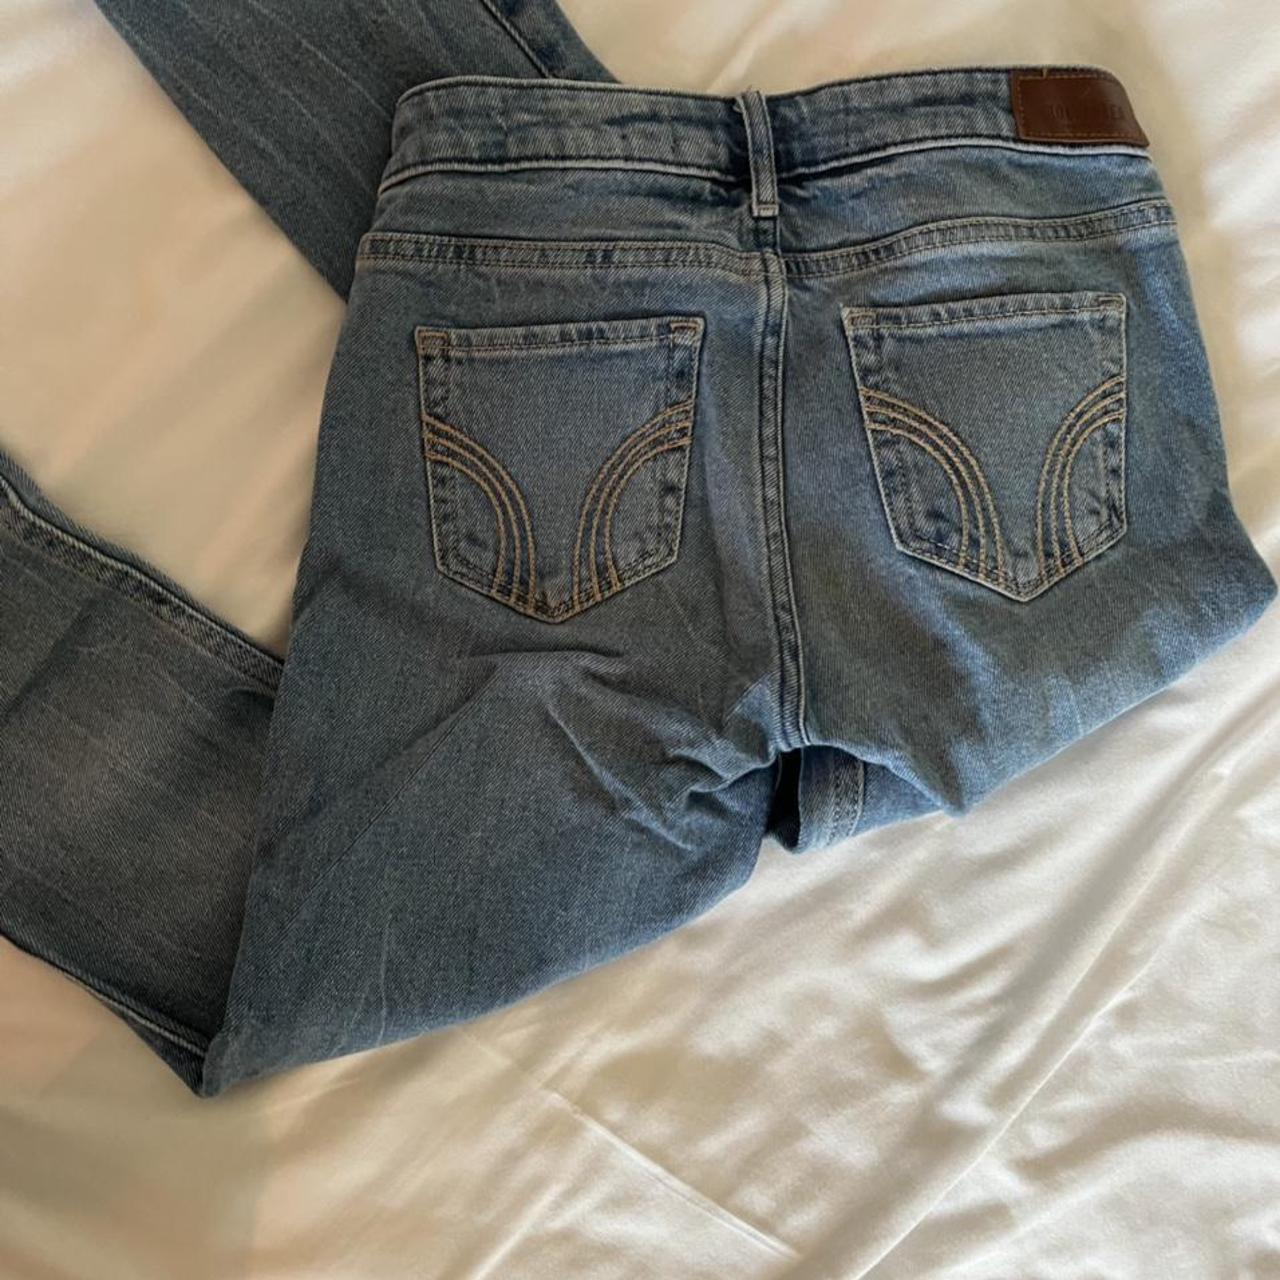 Hollister Co. Women's Navy and Blue Jeans